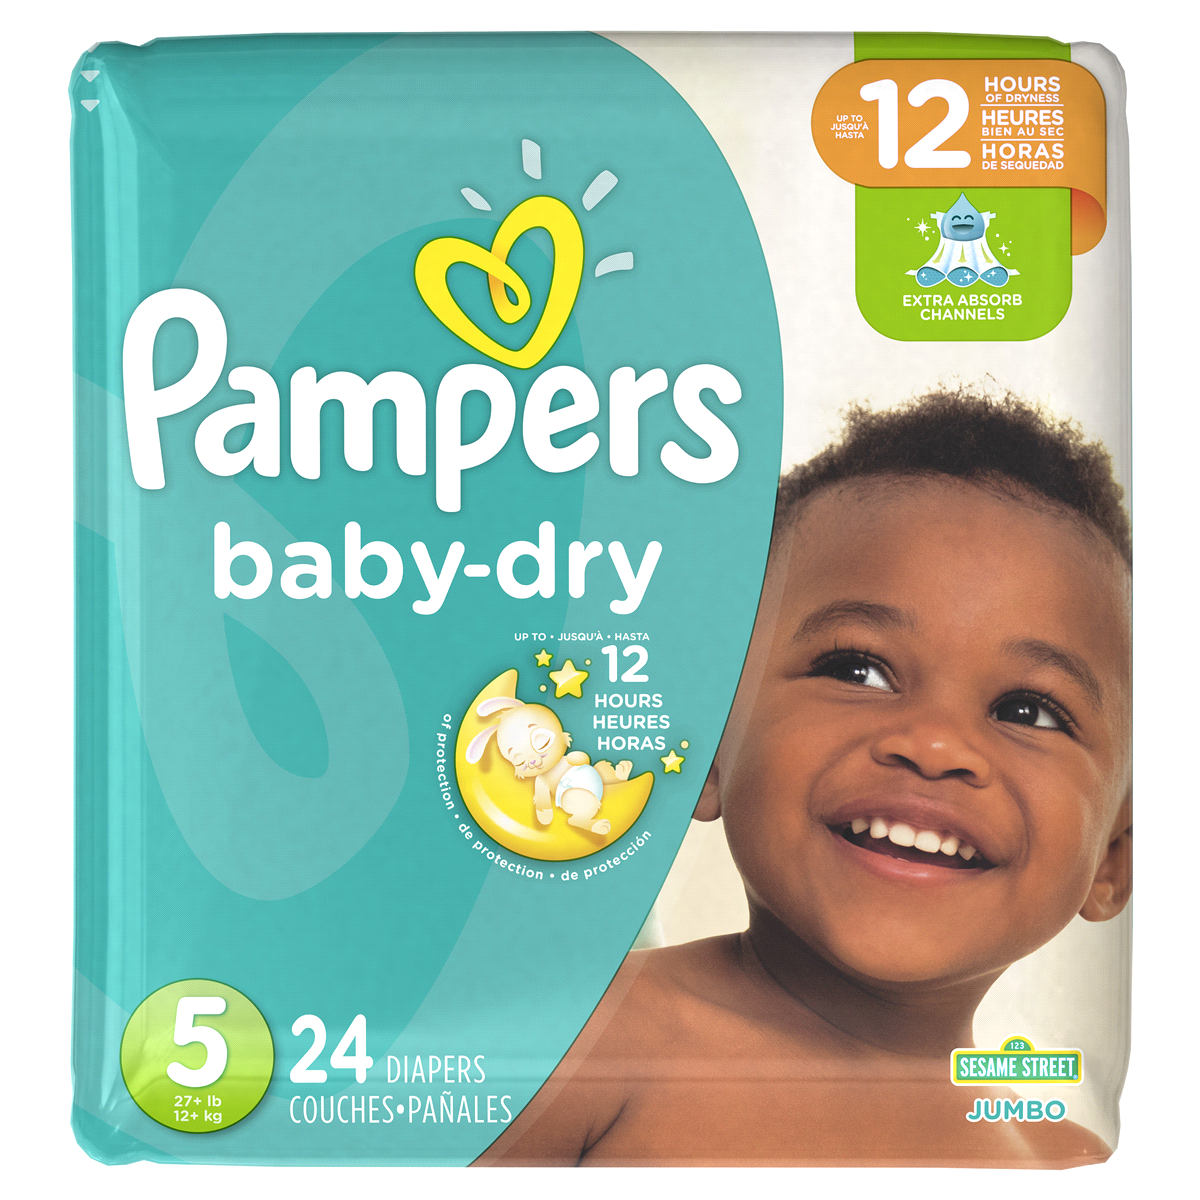 Pampers Size 5 Baby Dry 27+lb Diapers 24 Count (Pack of 4)